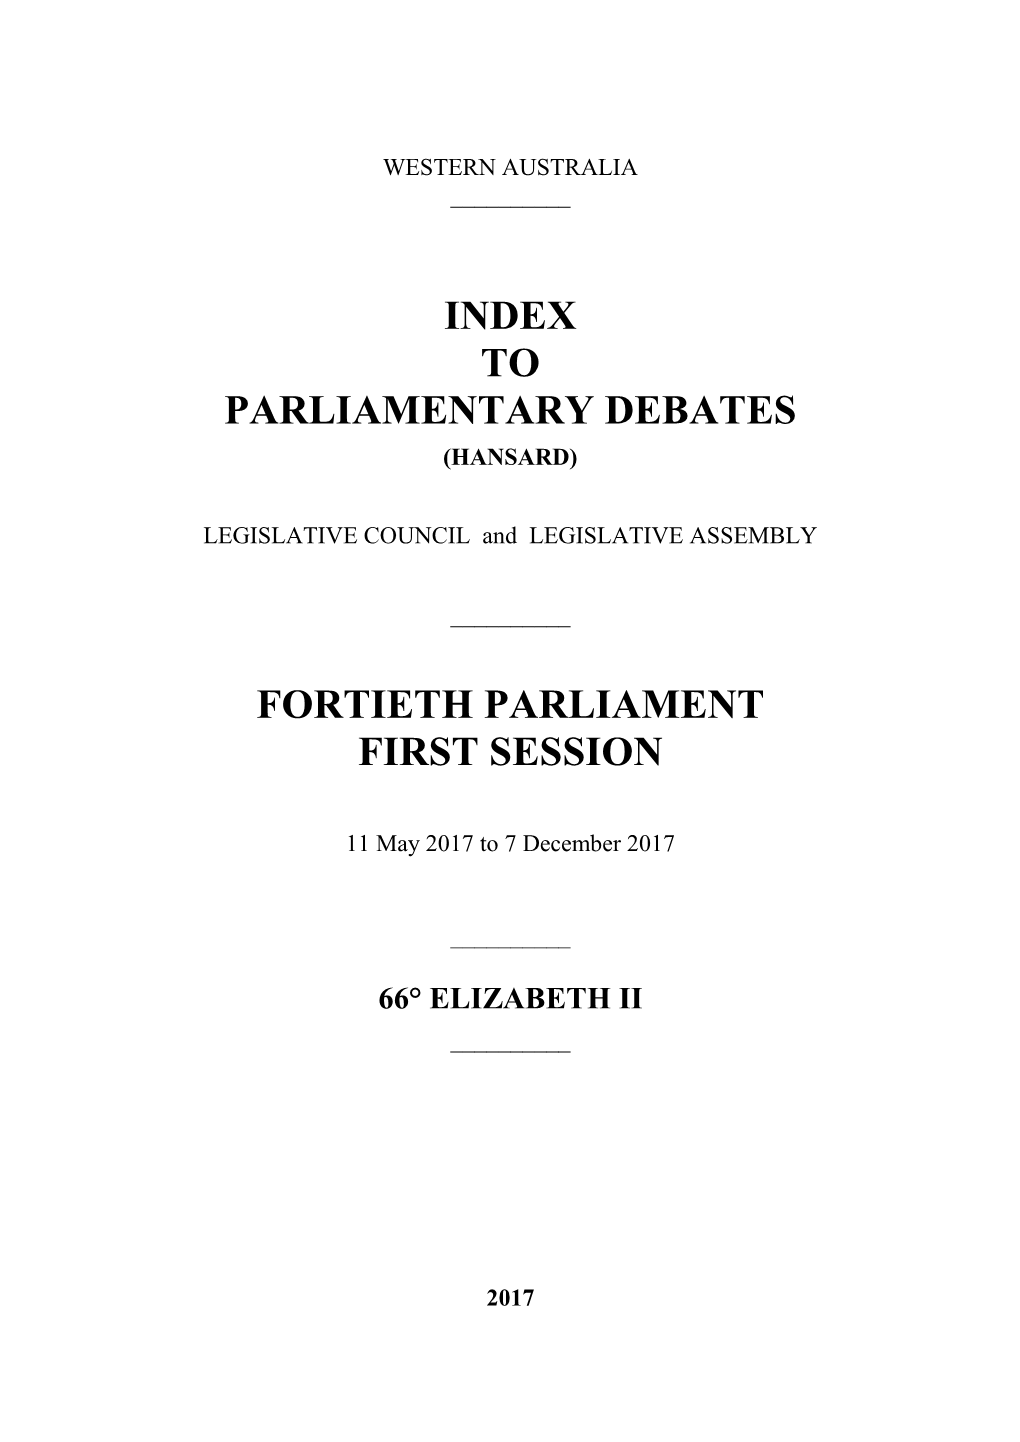 Index to Parliamentary Debates Fortieth Parliament First Session